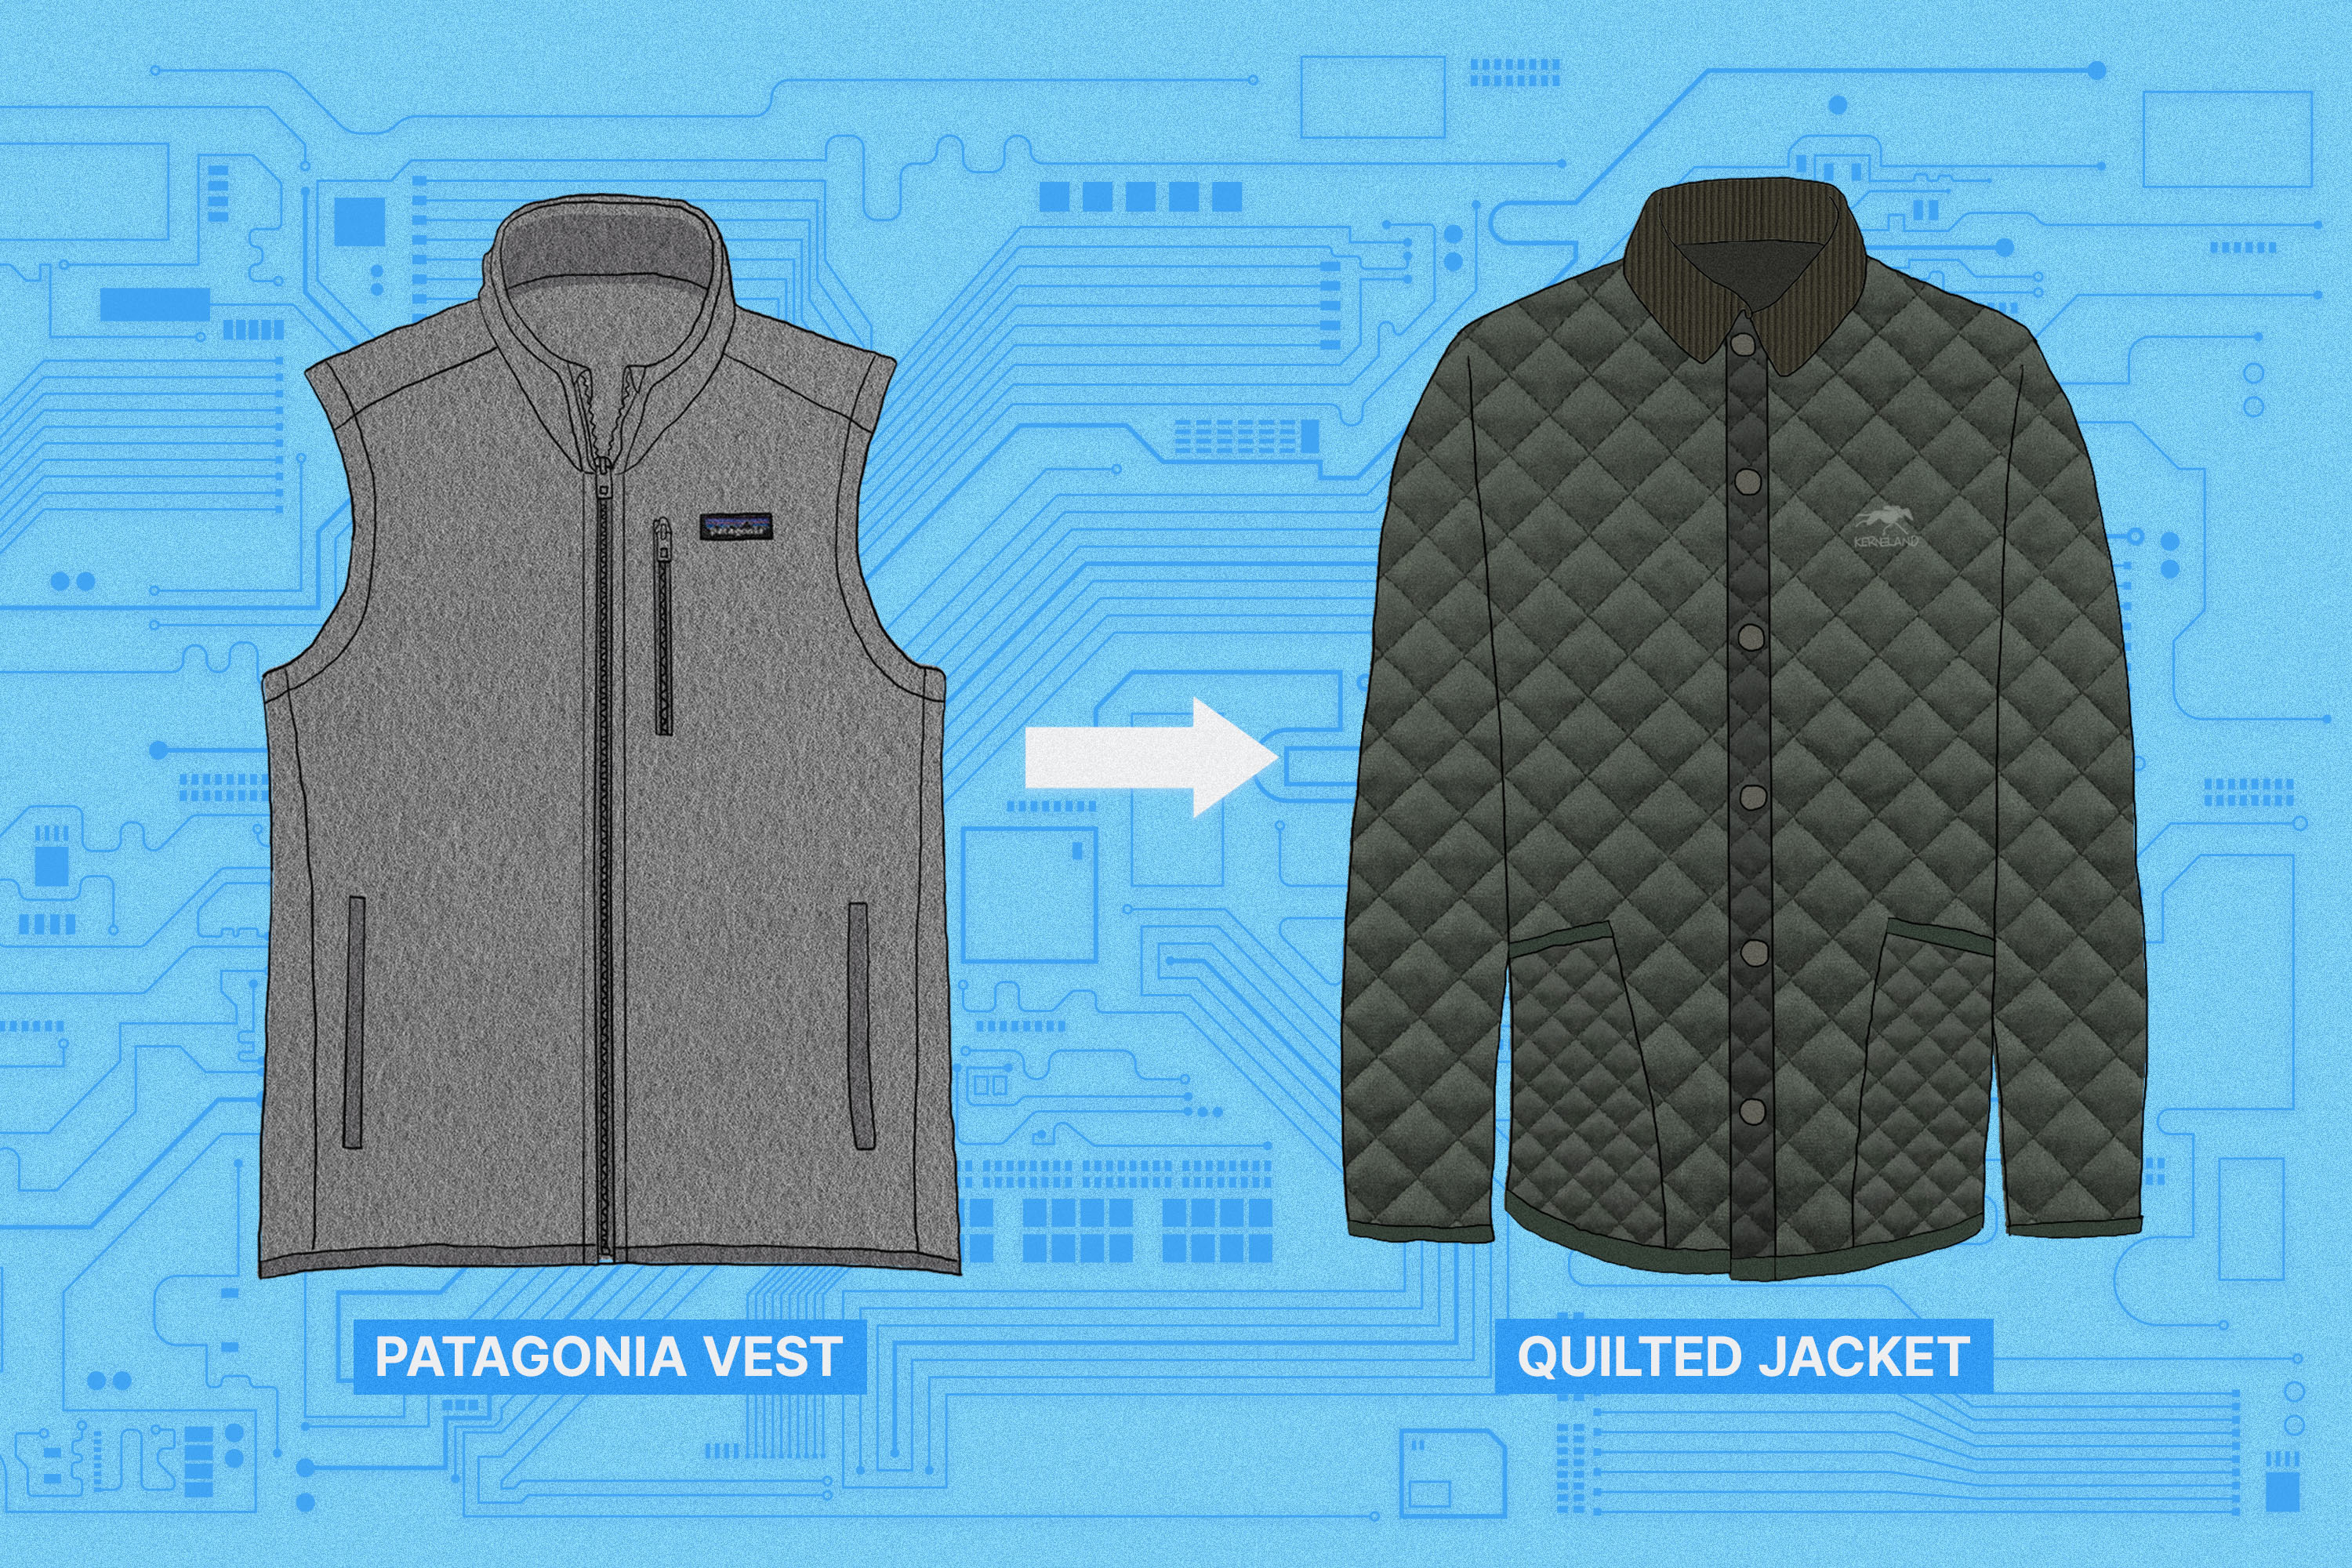 A comparison of a Patagonia vest and quilted jacket.